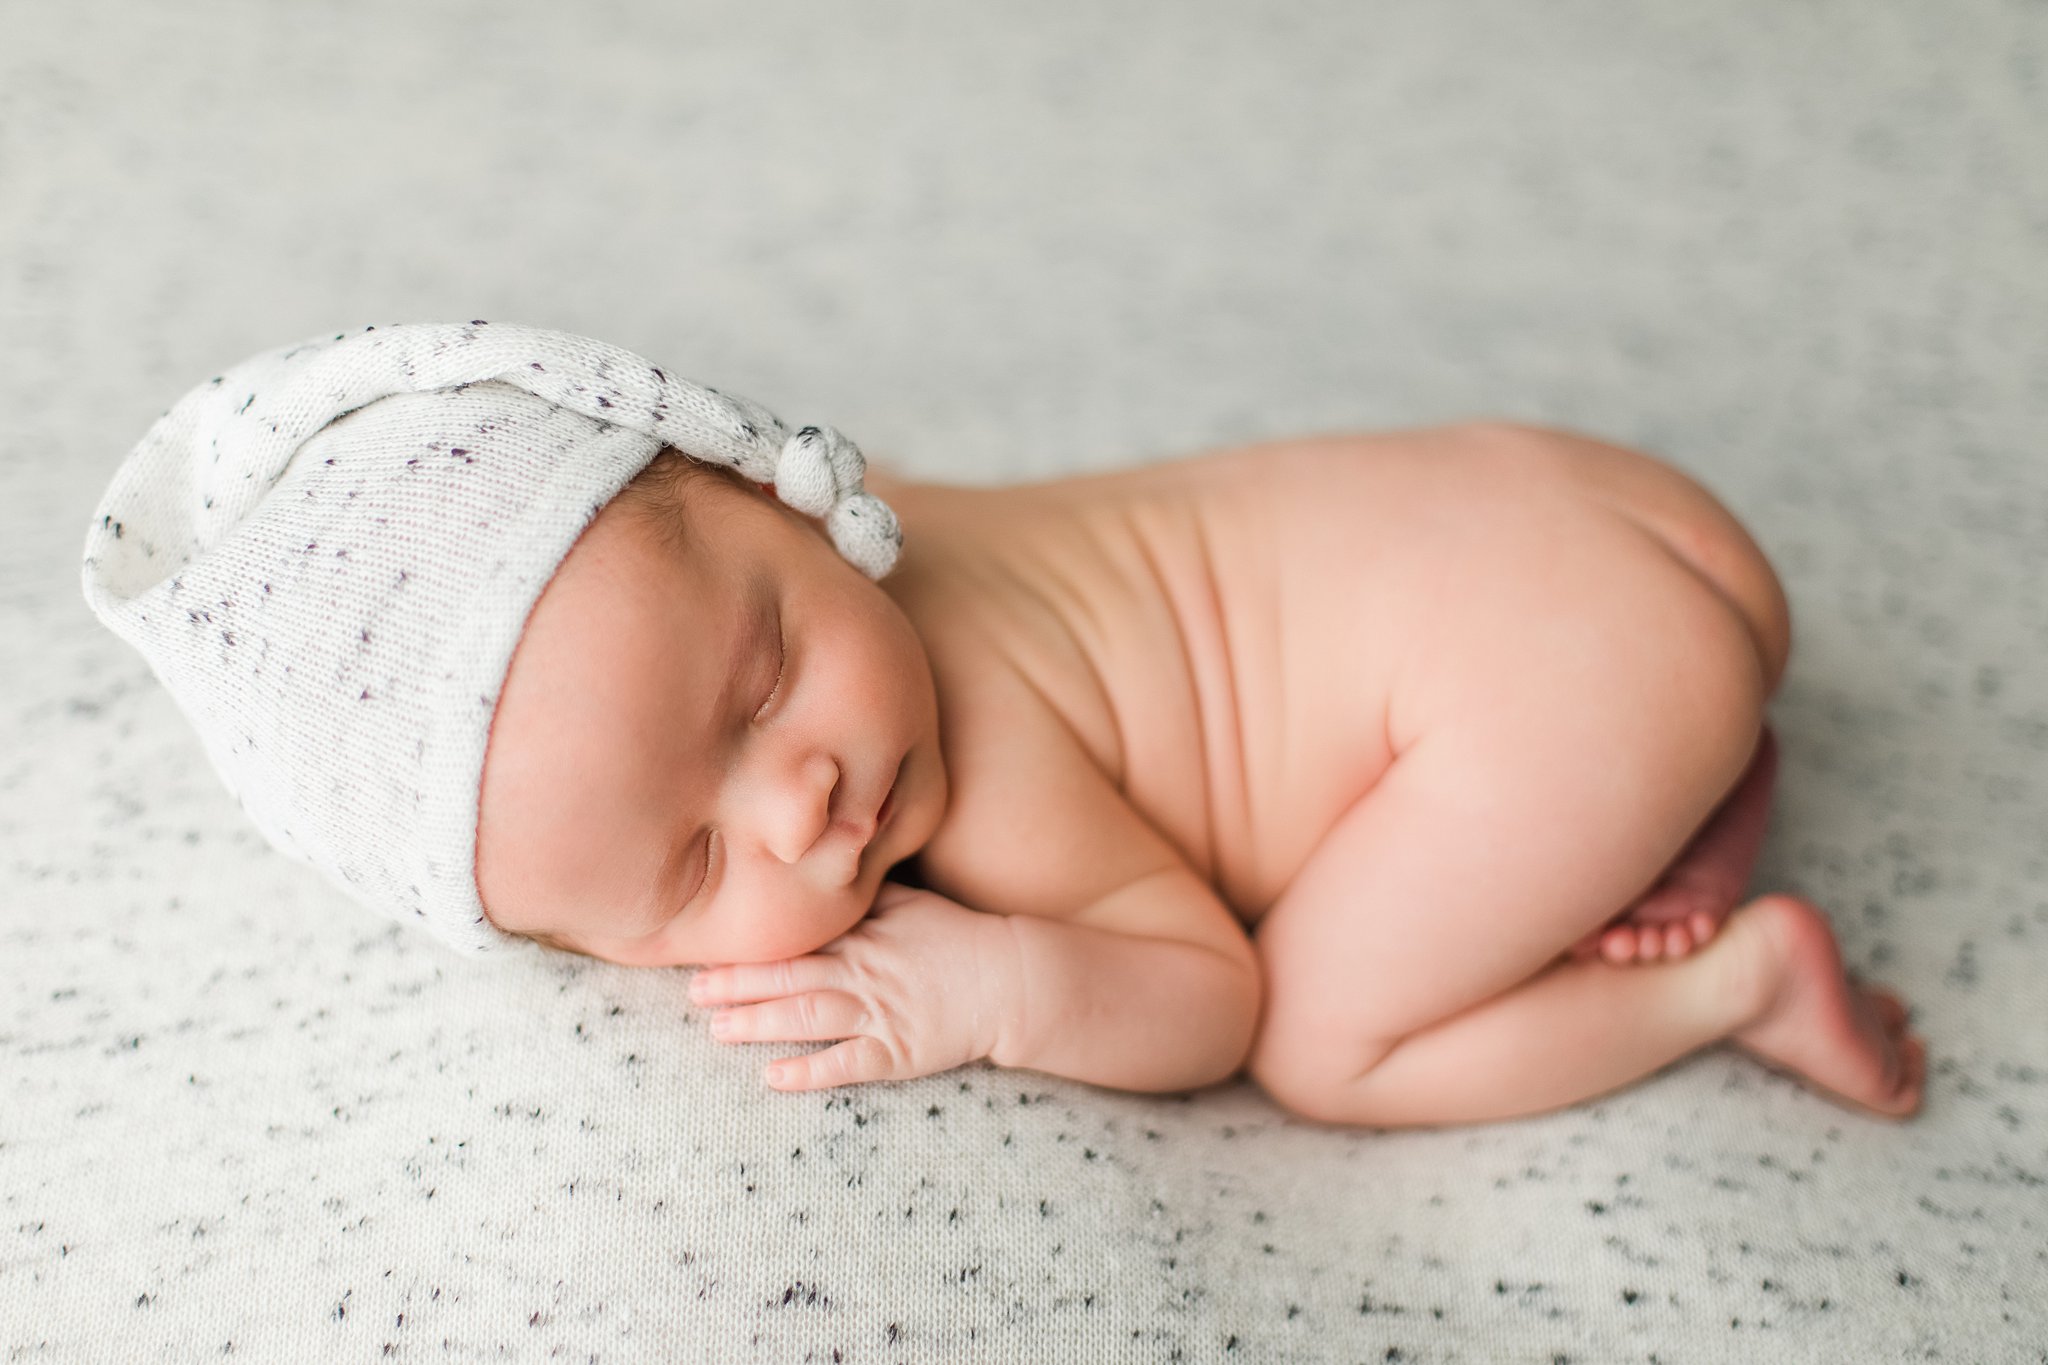 A newborn baby in a speckled hat sleeps in froggy pose on a matching blanket Tennessee Maternal Fetal Medicine